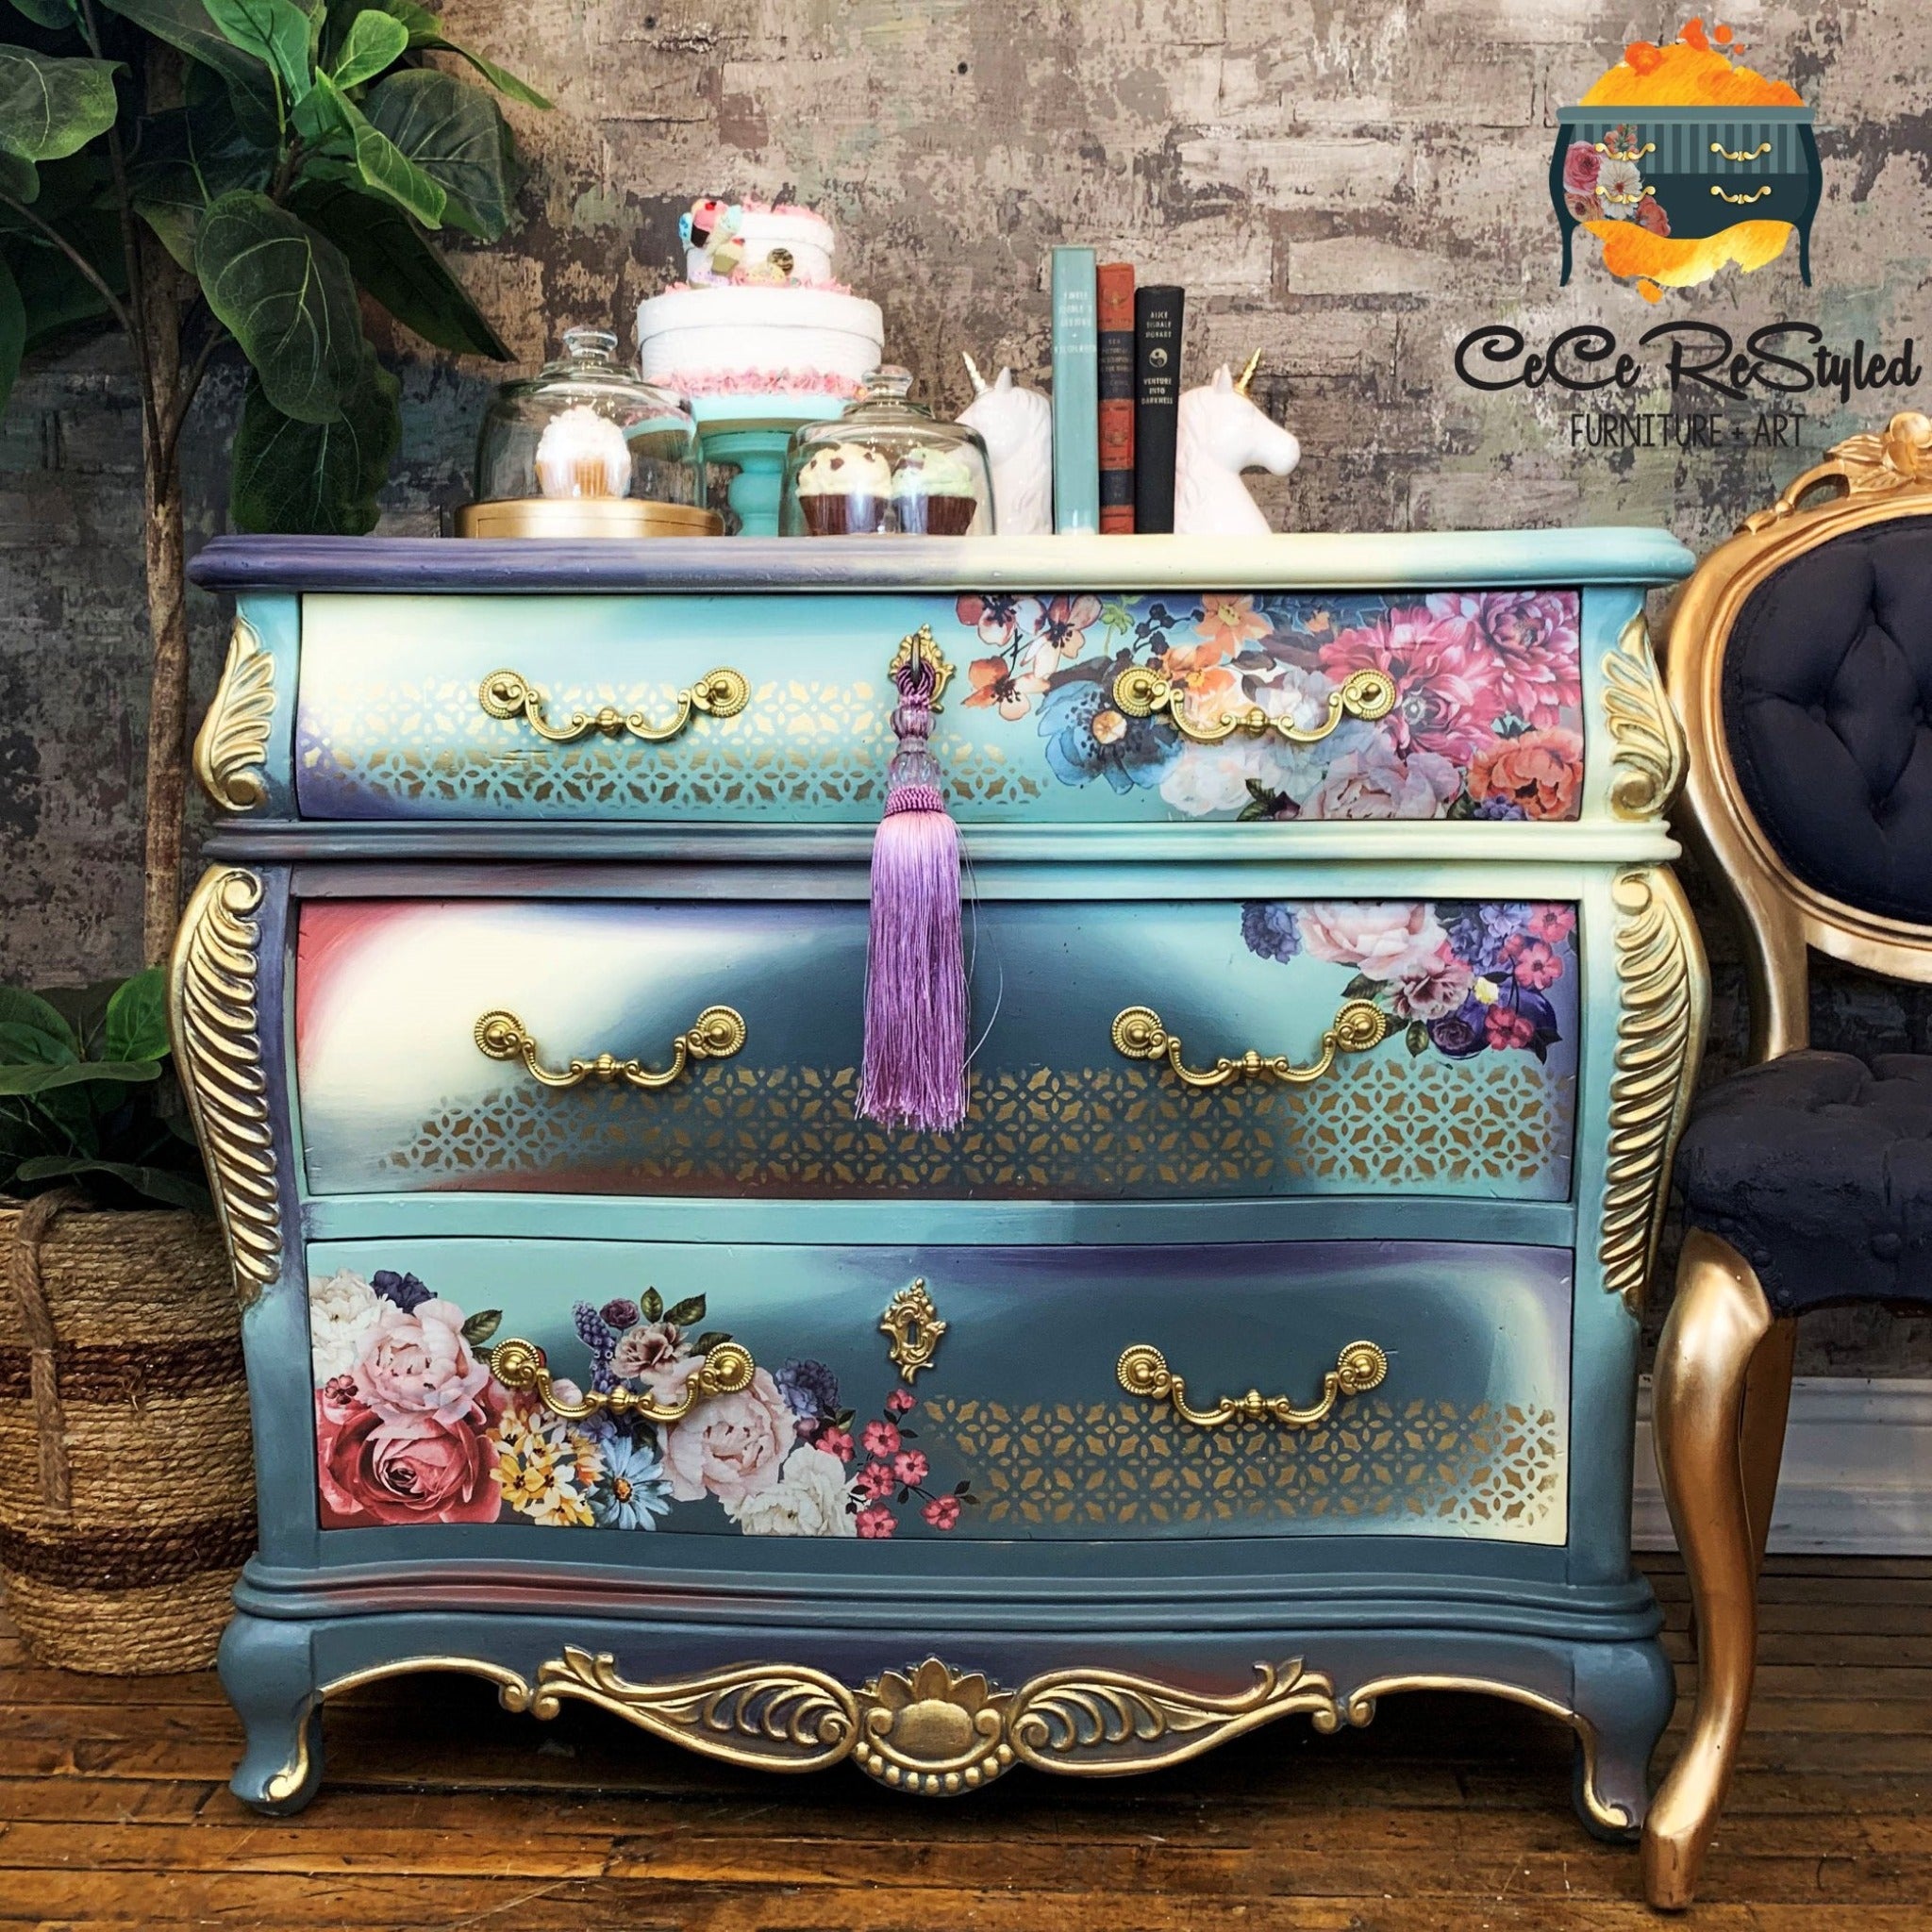 A vintage Bombay style dresser refurbished by CeCe ReStyled is painted a blend of blues and white with gold accents and features ReDesign with Prima's Ruby Rose rub-on transfer at the top right and bottom left of the top and bottom drawers.